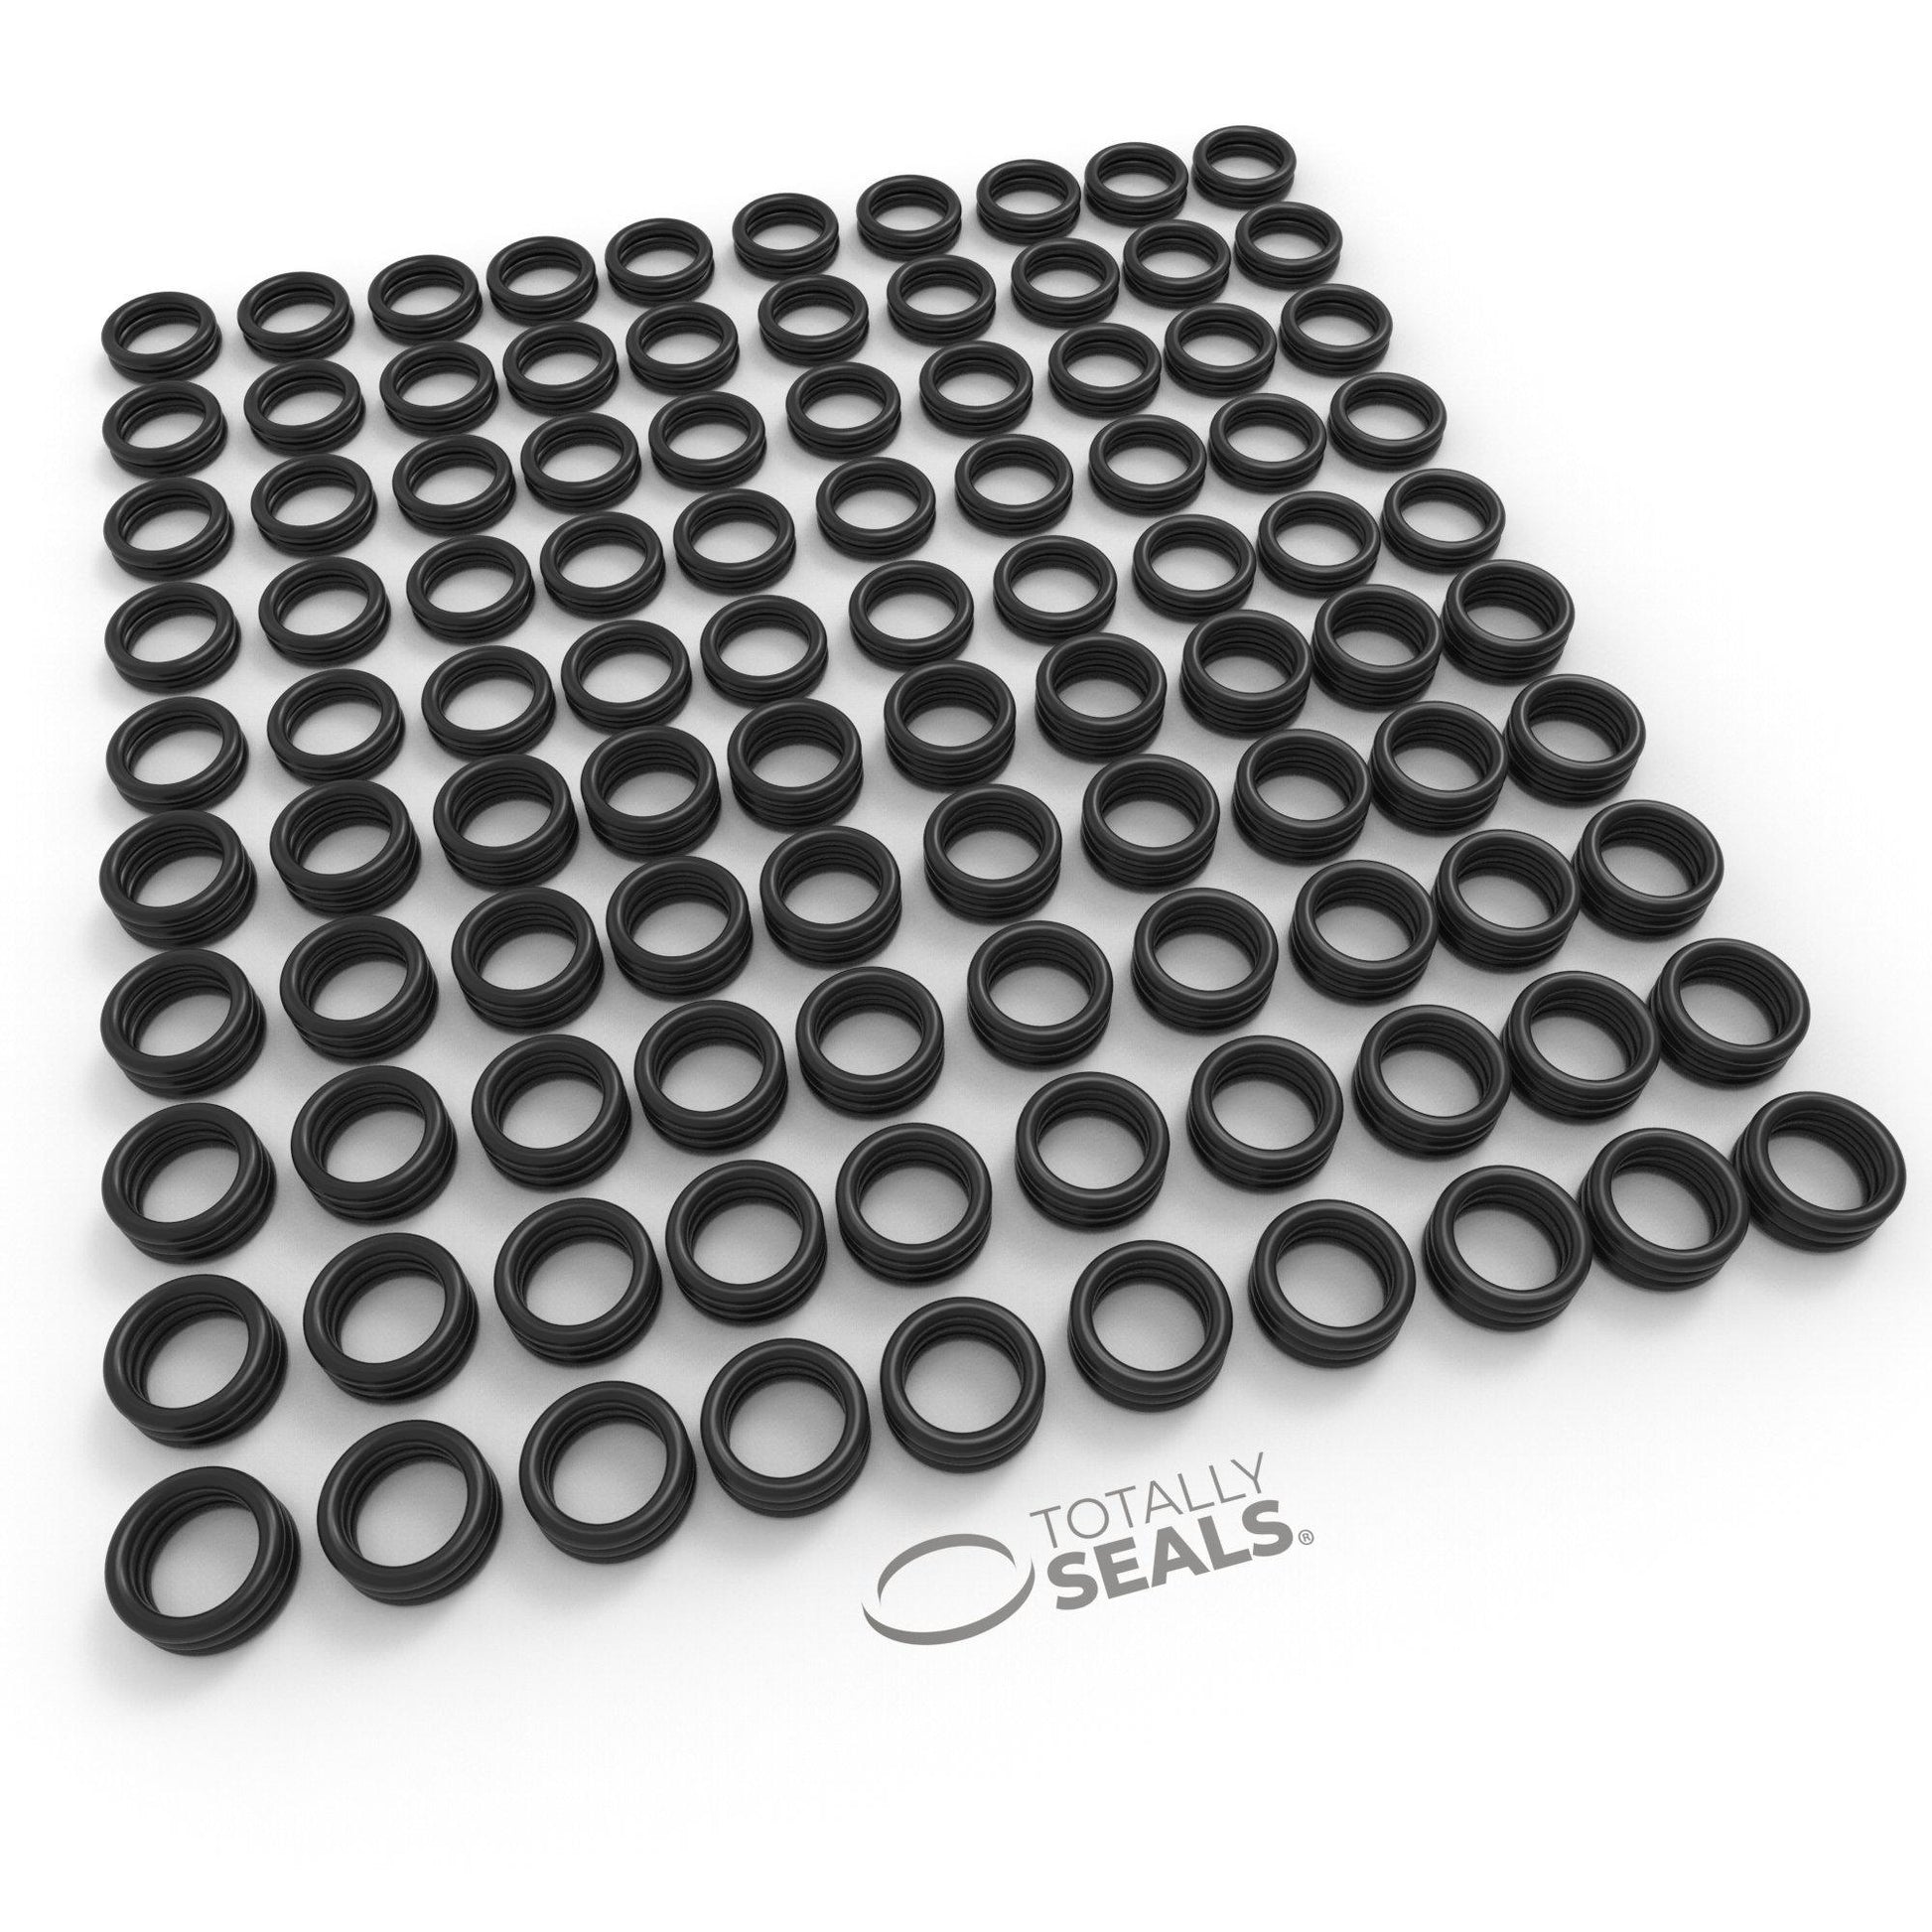 39mm x 2mm (43mm OD) Nitrile O-Rings - Totally Seals®